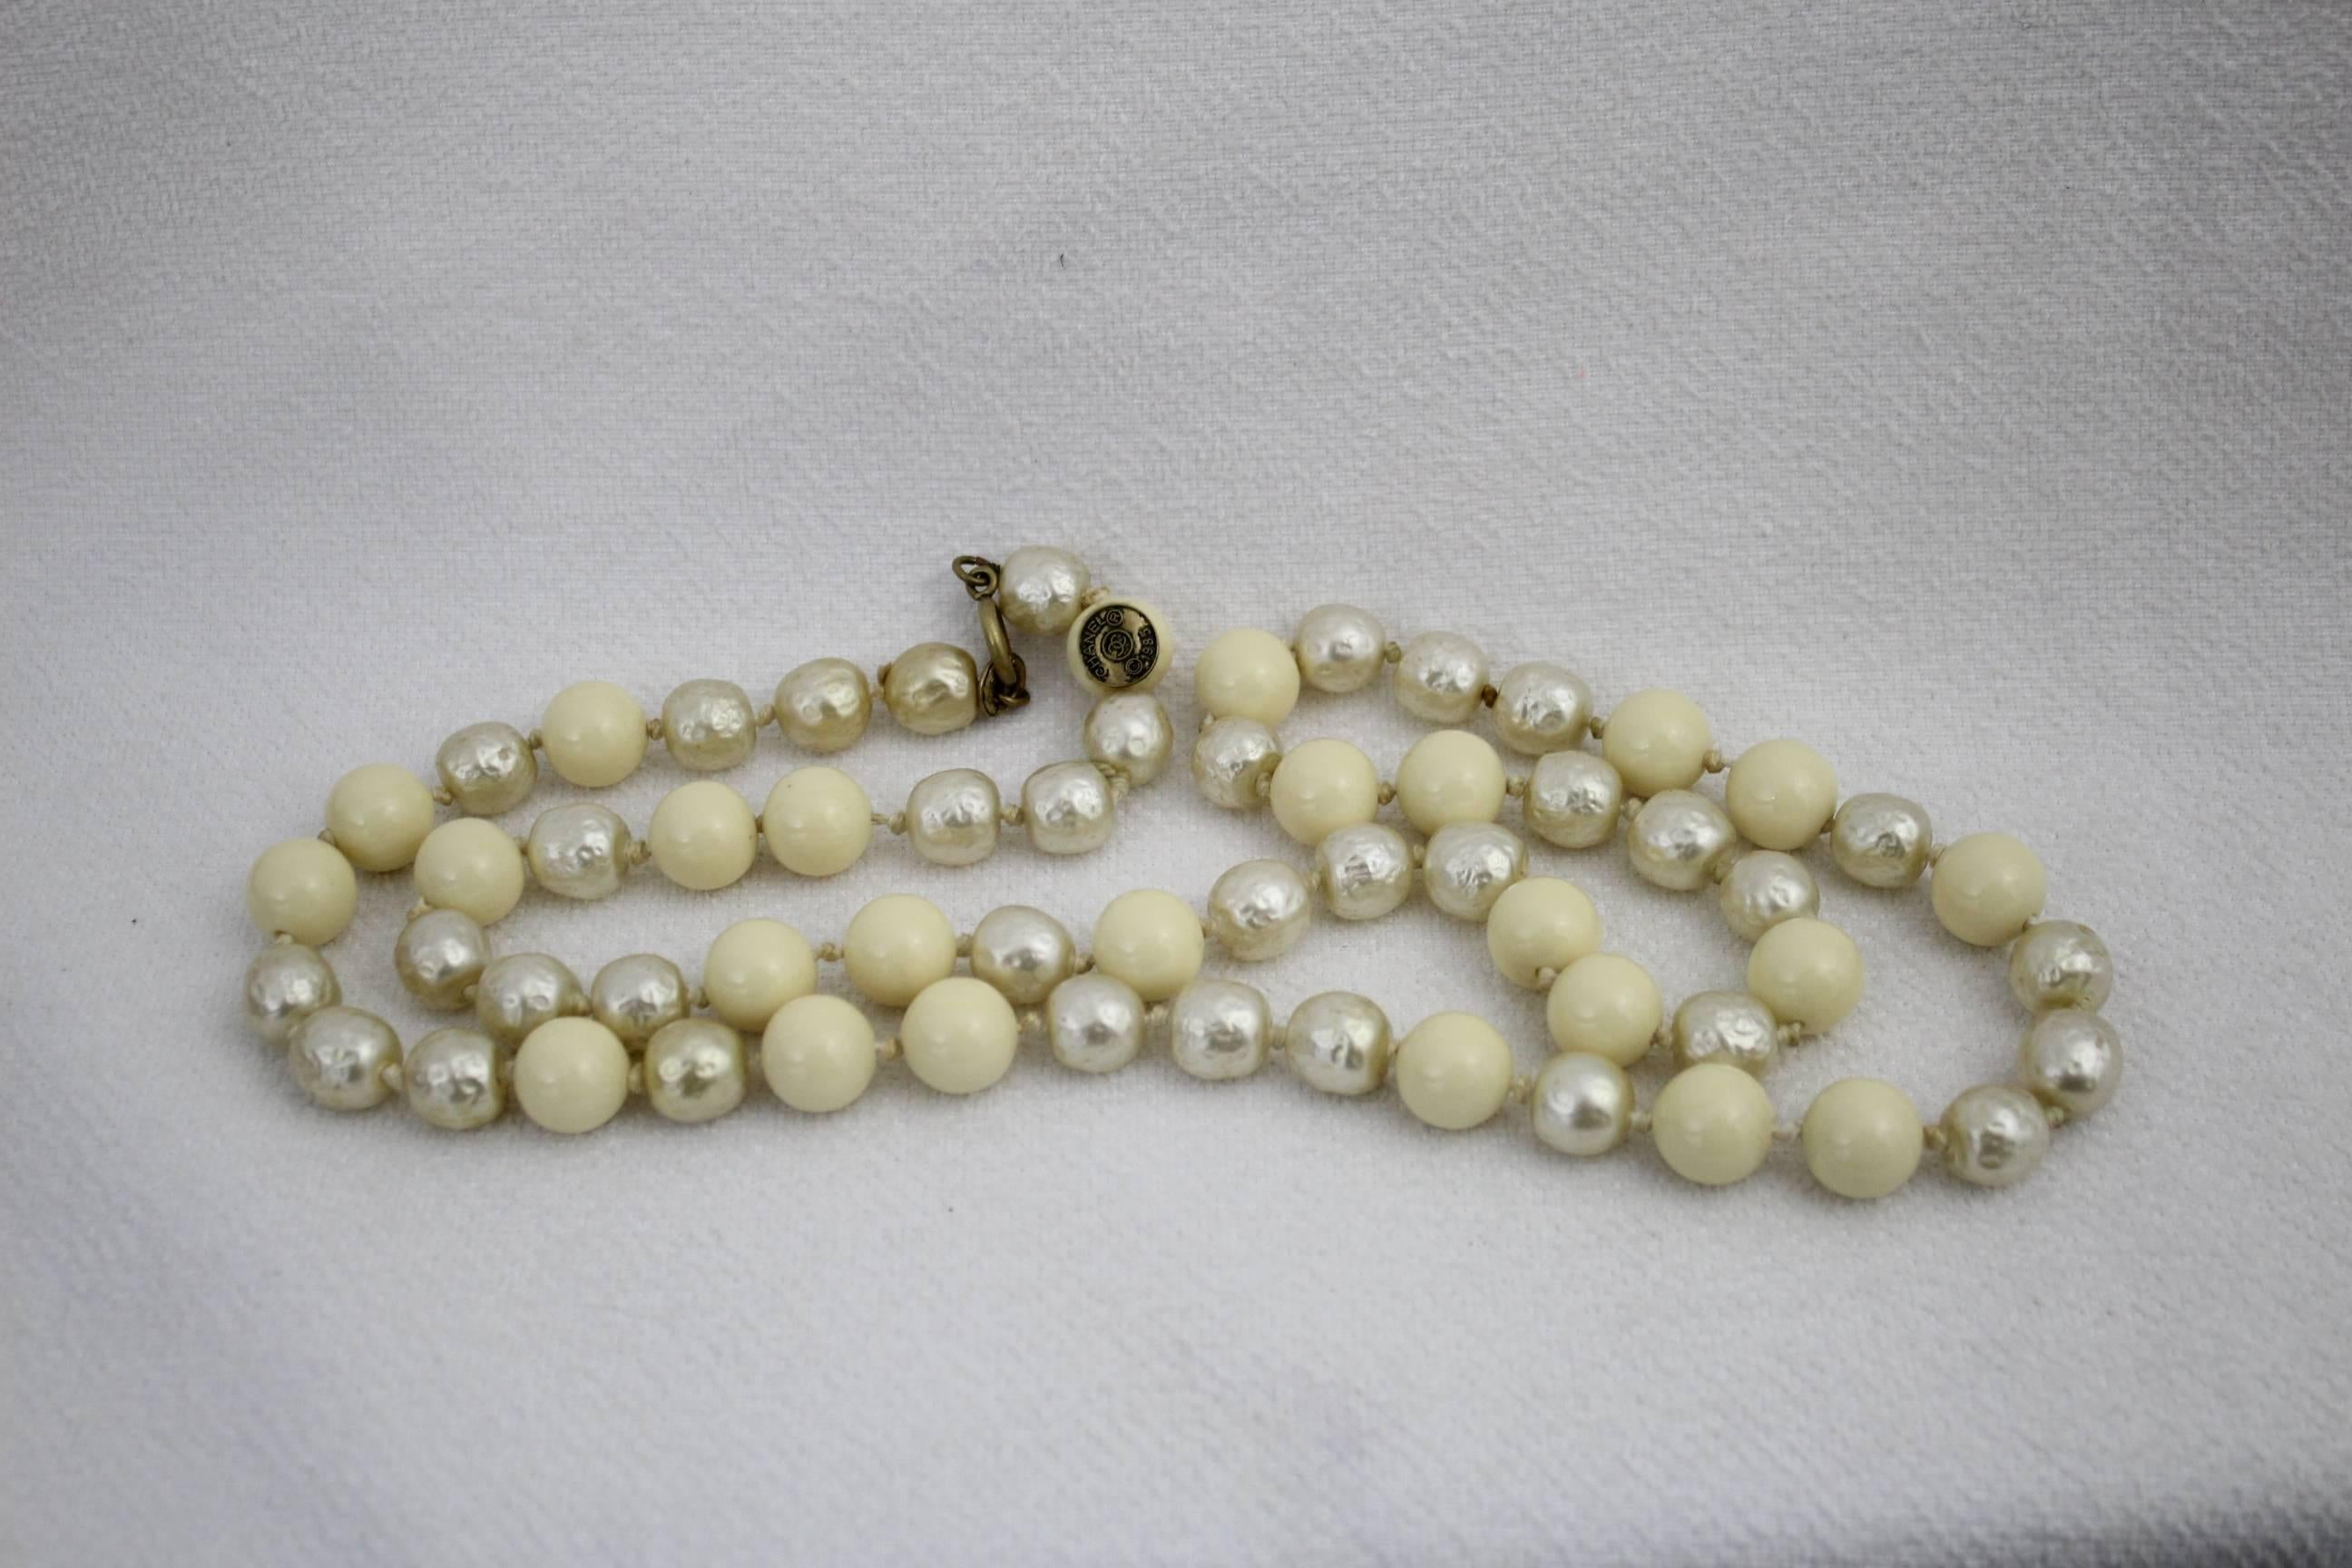 Really nice vintage Chanel necklace with 2 type of beads one like baroque pearls and the other in resine.

Good vintage condition, signs of wear.

Plate with brand in one of the pearls.

Lenght 37 inches